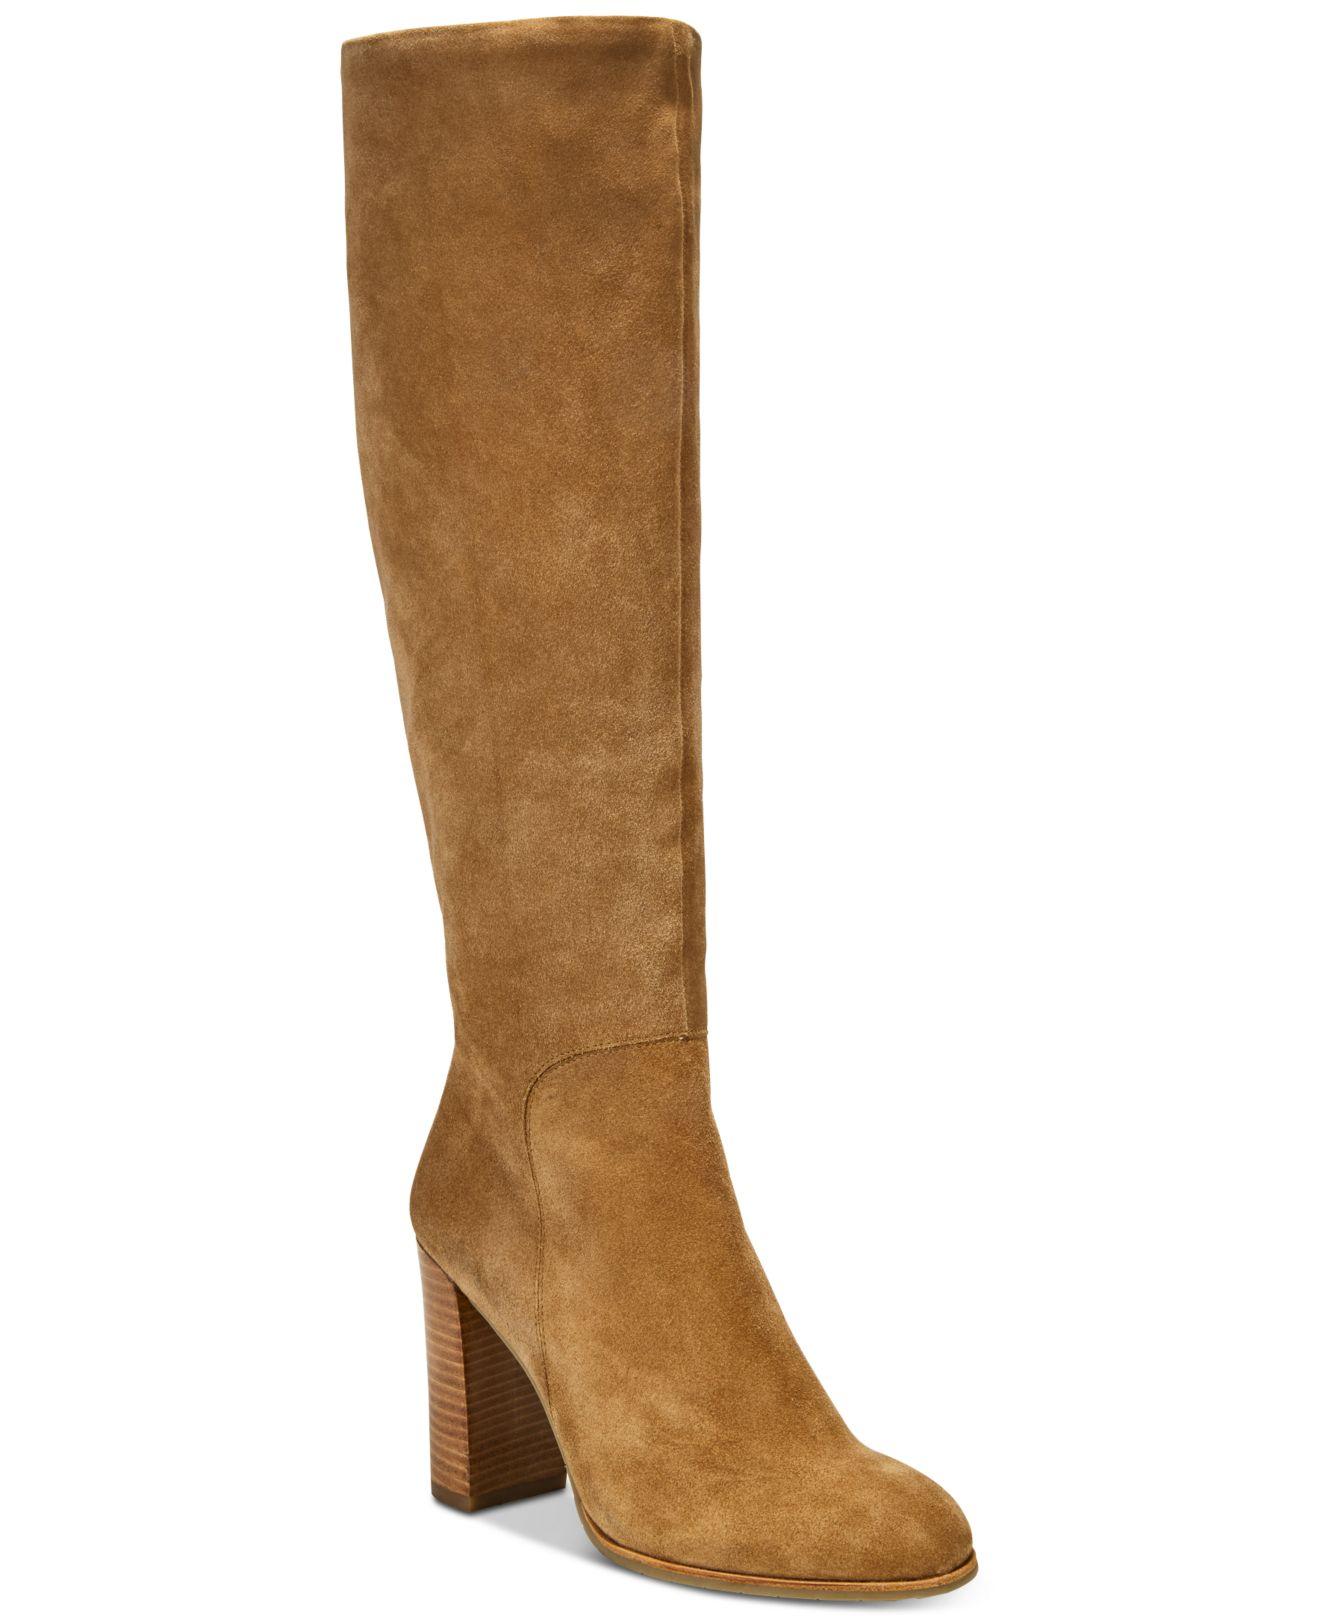 Kenneth Cole Leather Justin Block-heel Tall Boots in Taupe (Brown) - Lyst